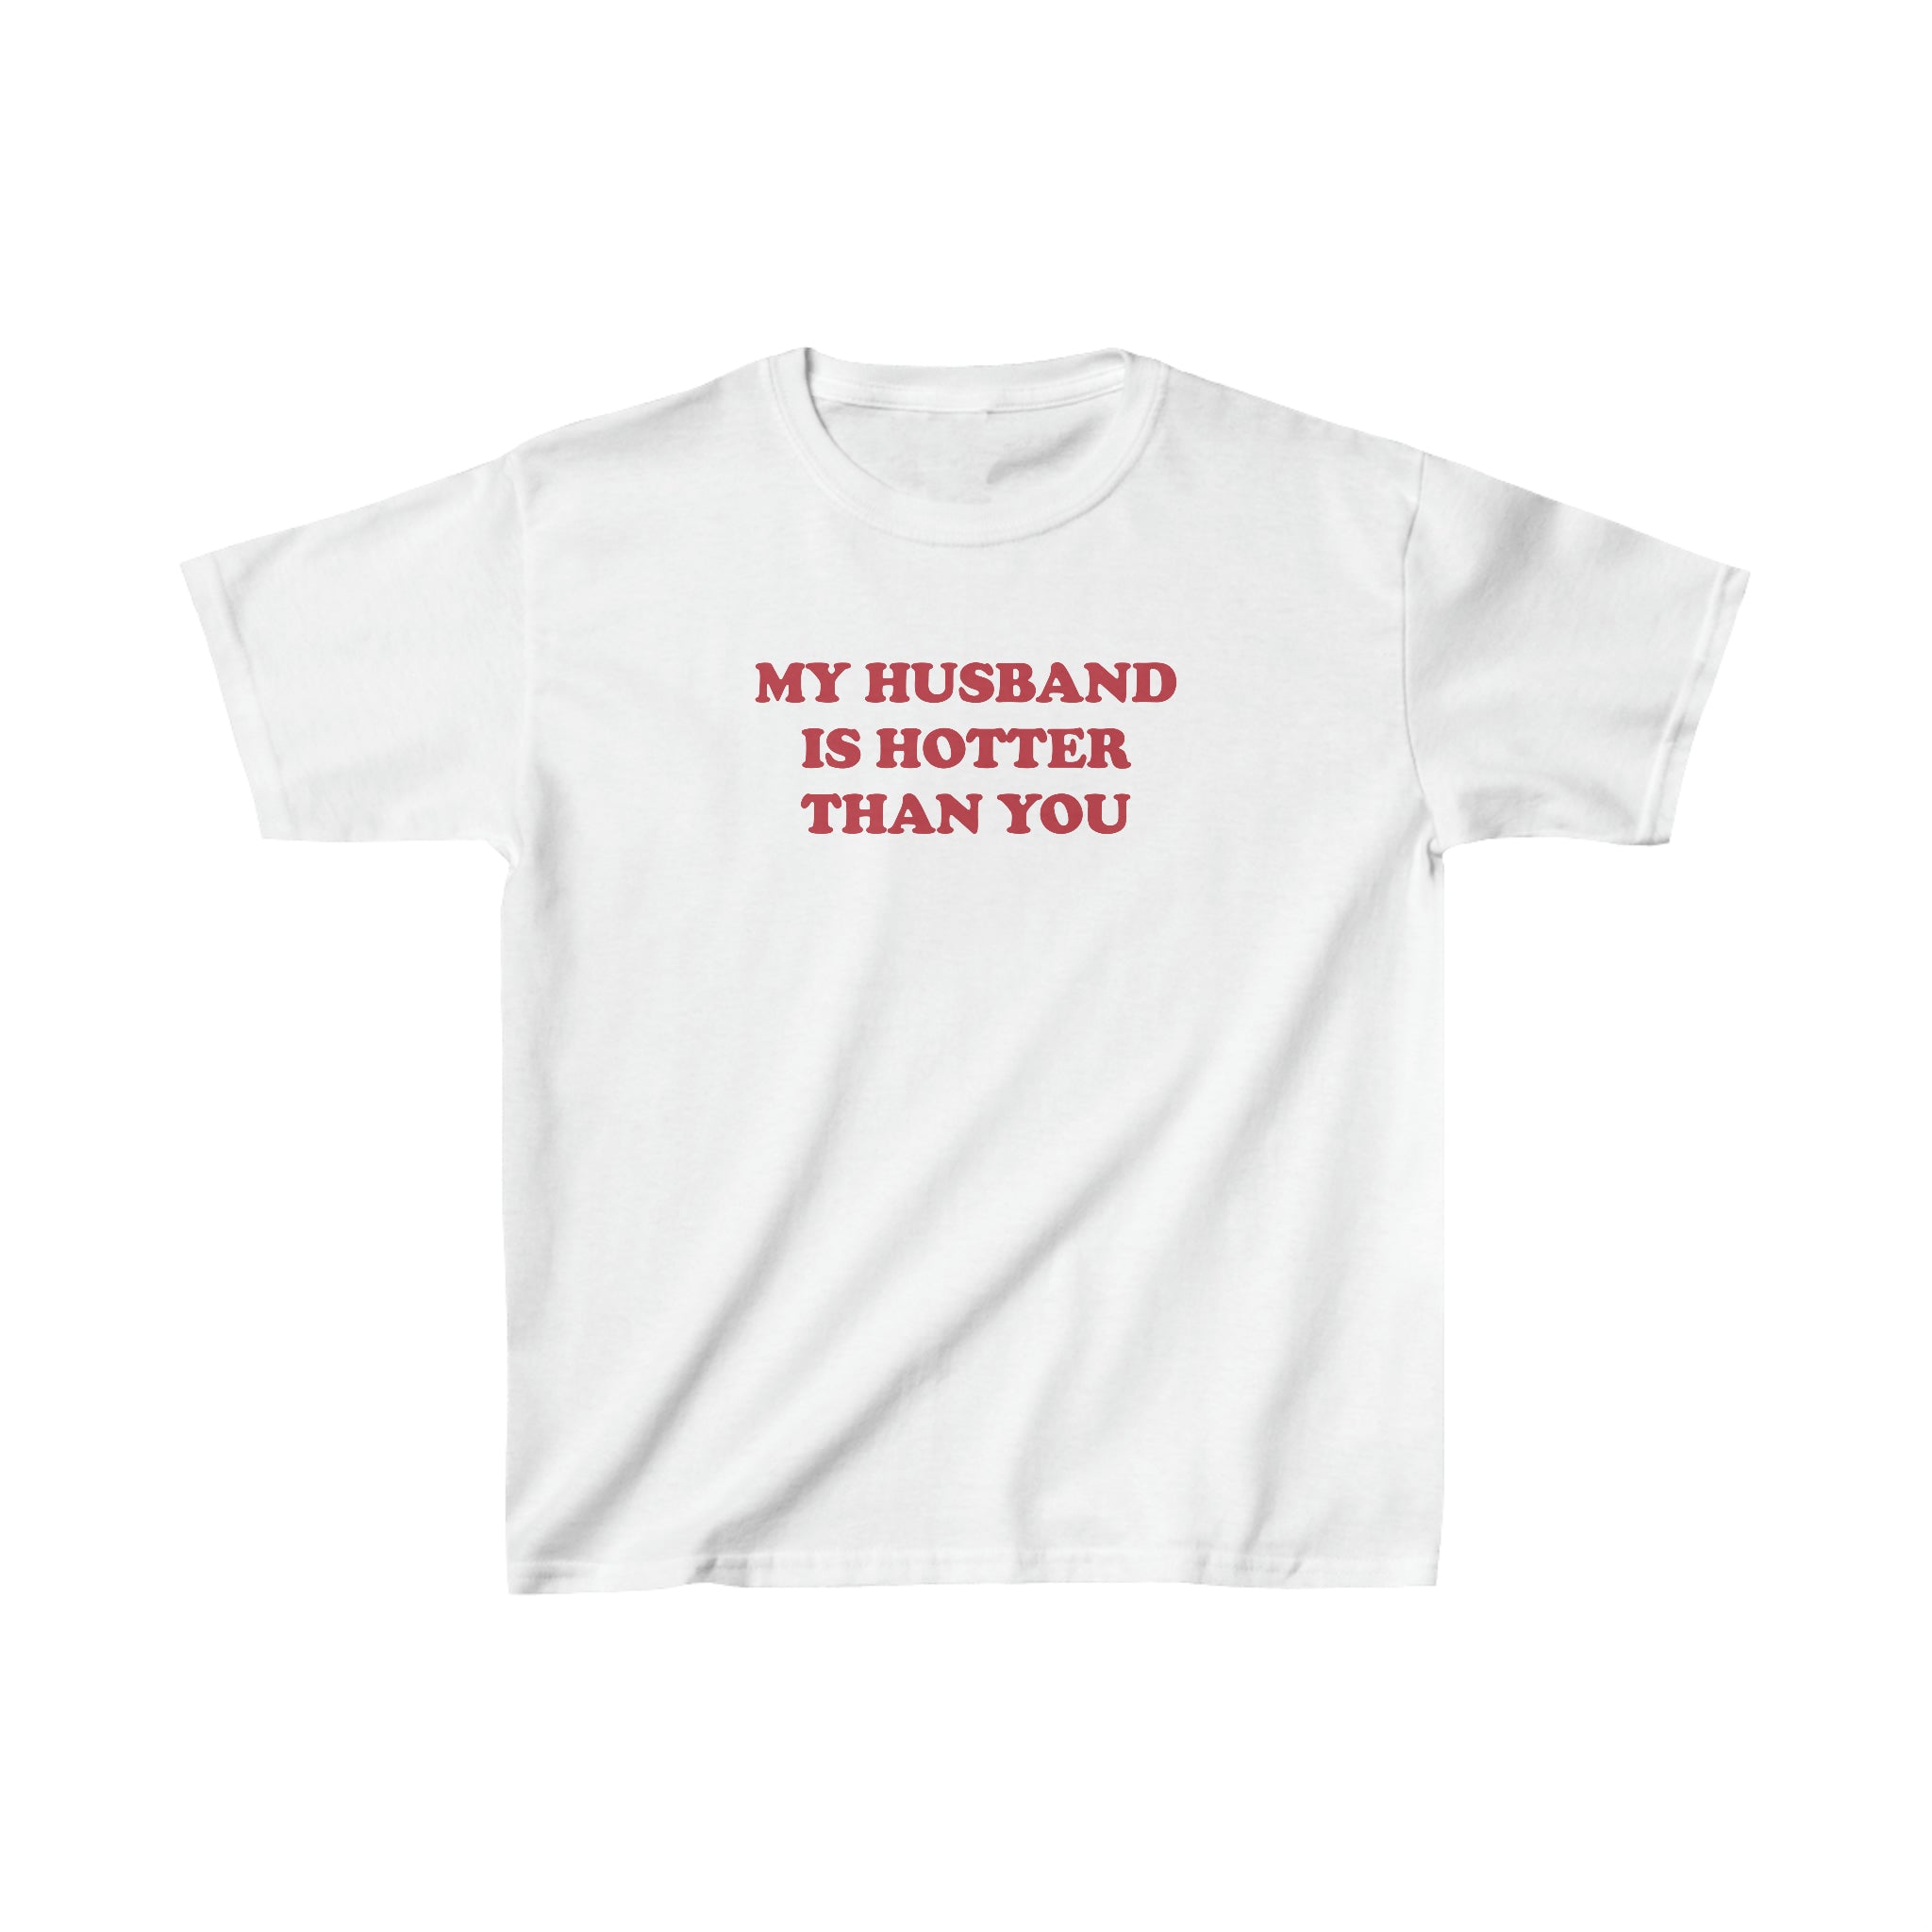 'My Husband is Hotter Than You' baby tee - In Print We Trust